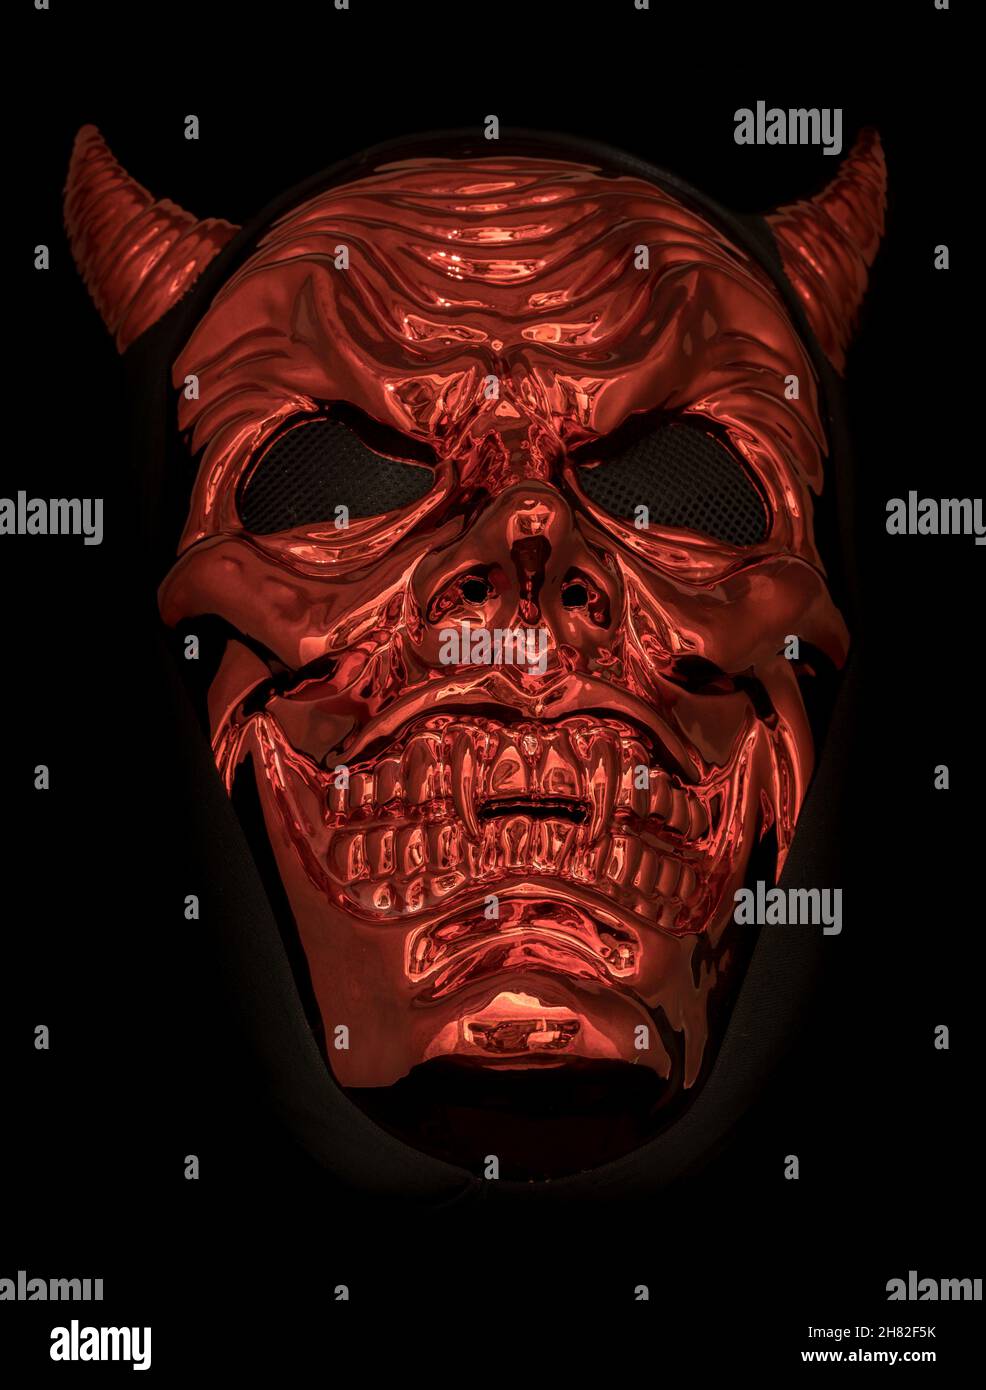 Metallic Red Devil Mask Isolated Against Black Background Stock Photo